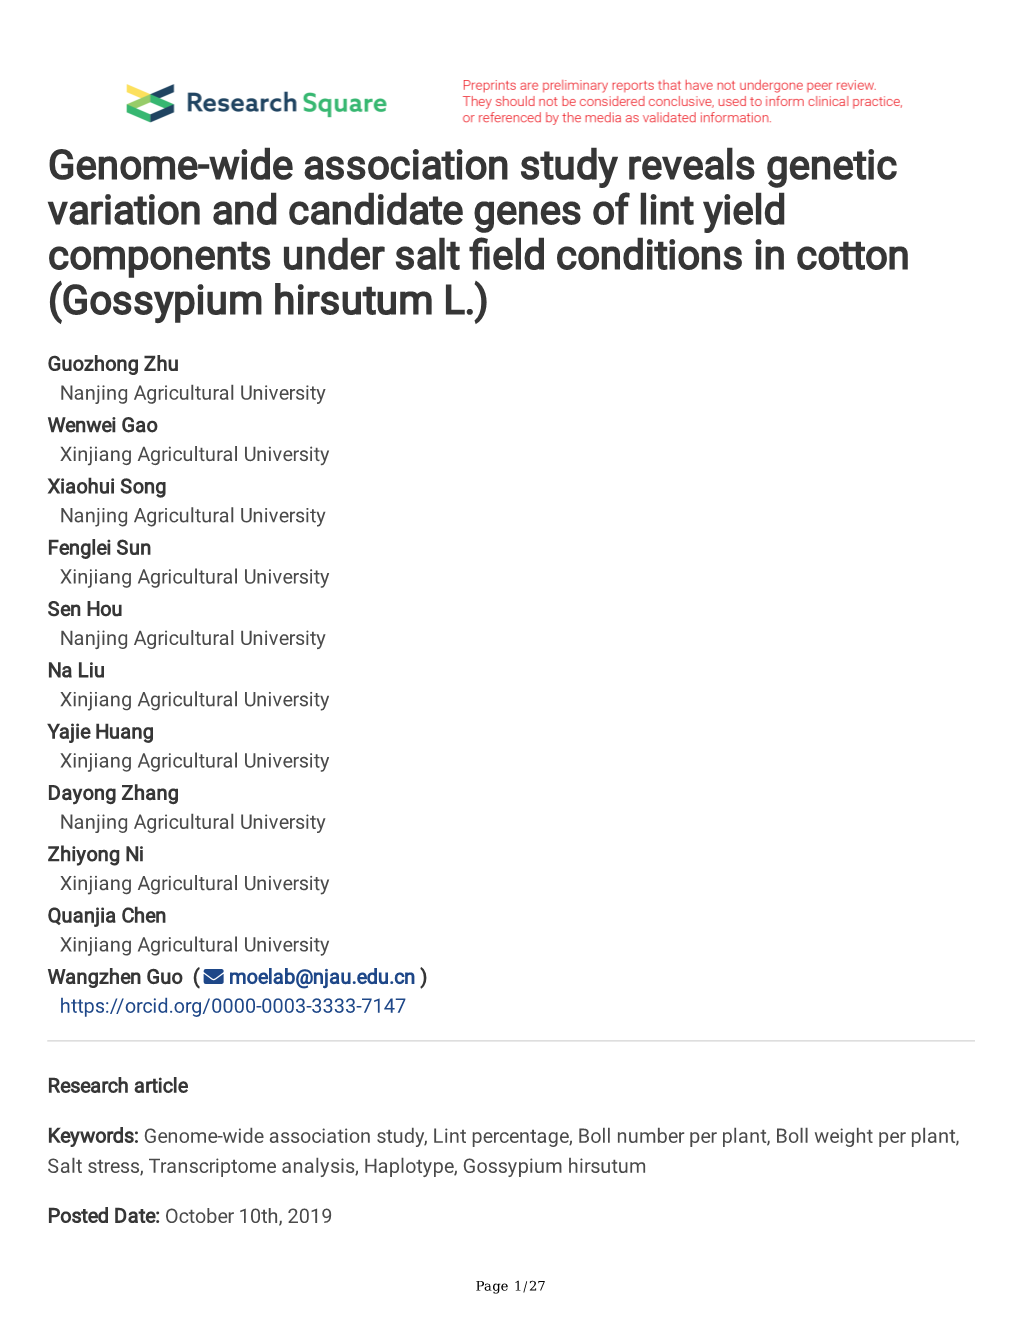 Genome-Wide Association Study Reveals Genetic Variation and Candidate Genes of Lint Yield Components Under Salt Feld Conditions in Cotton (Gossypium Hirsutum L.)